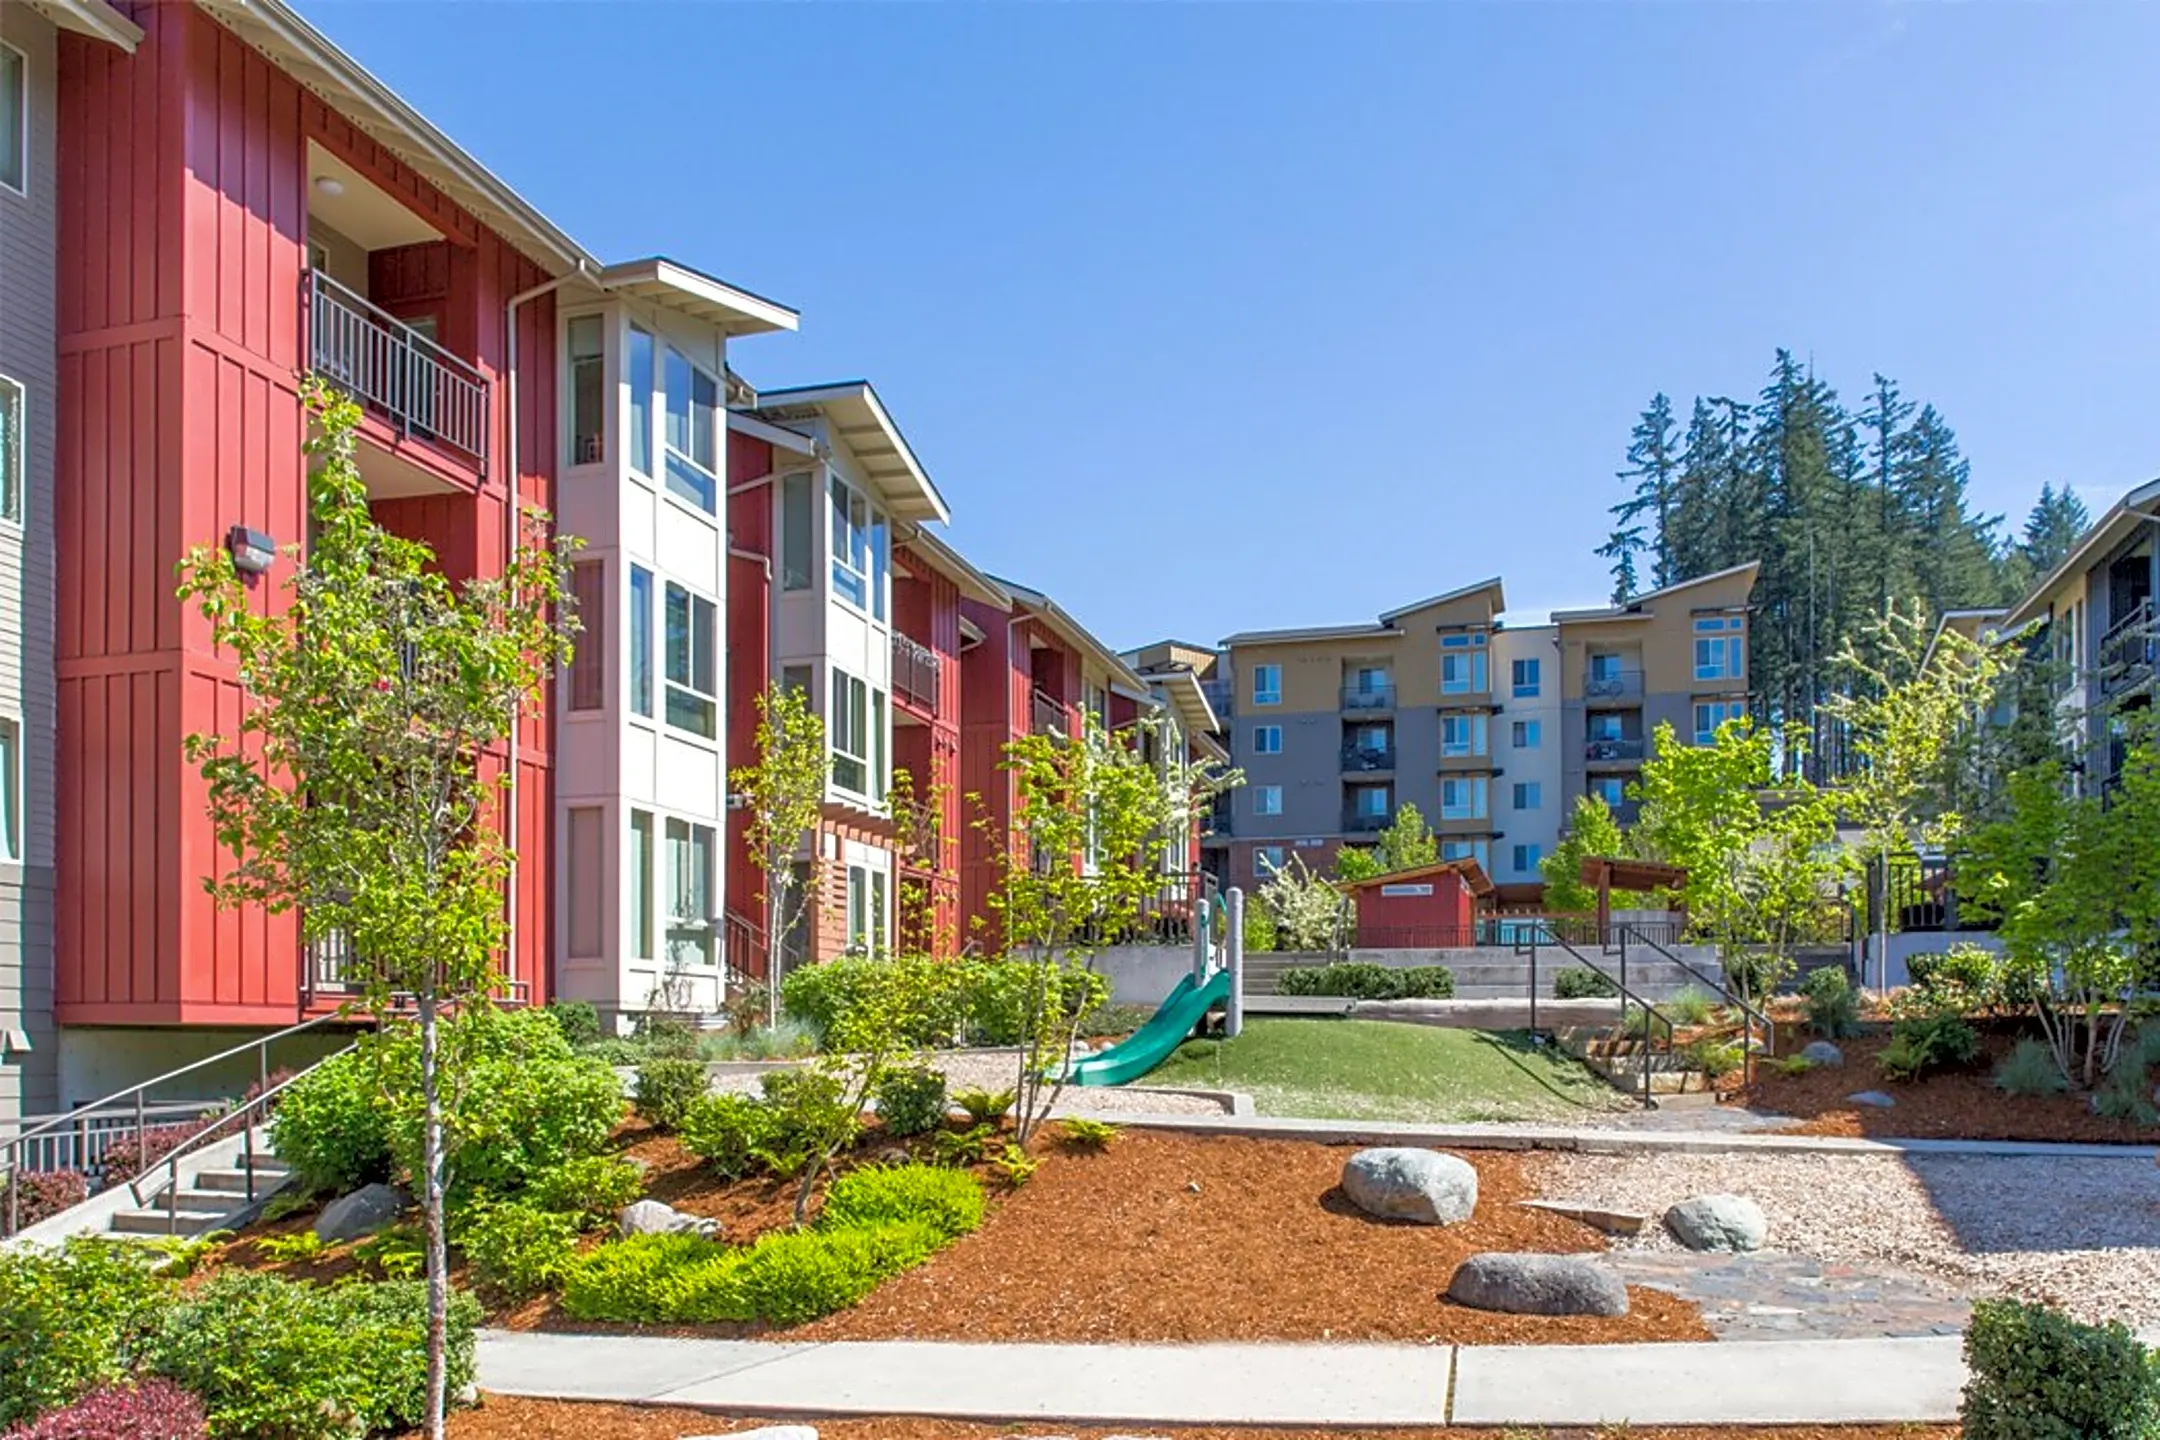 Building - Discovery Heights - Issaquah, WA